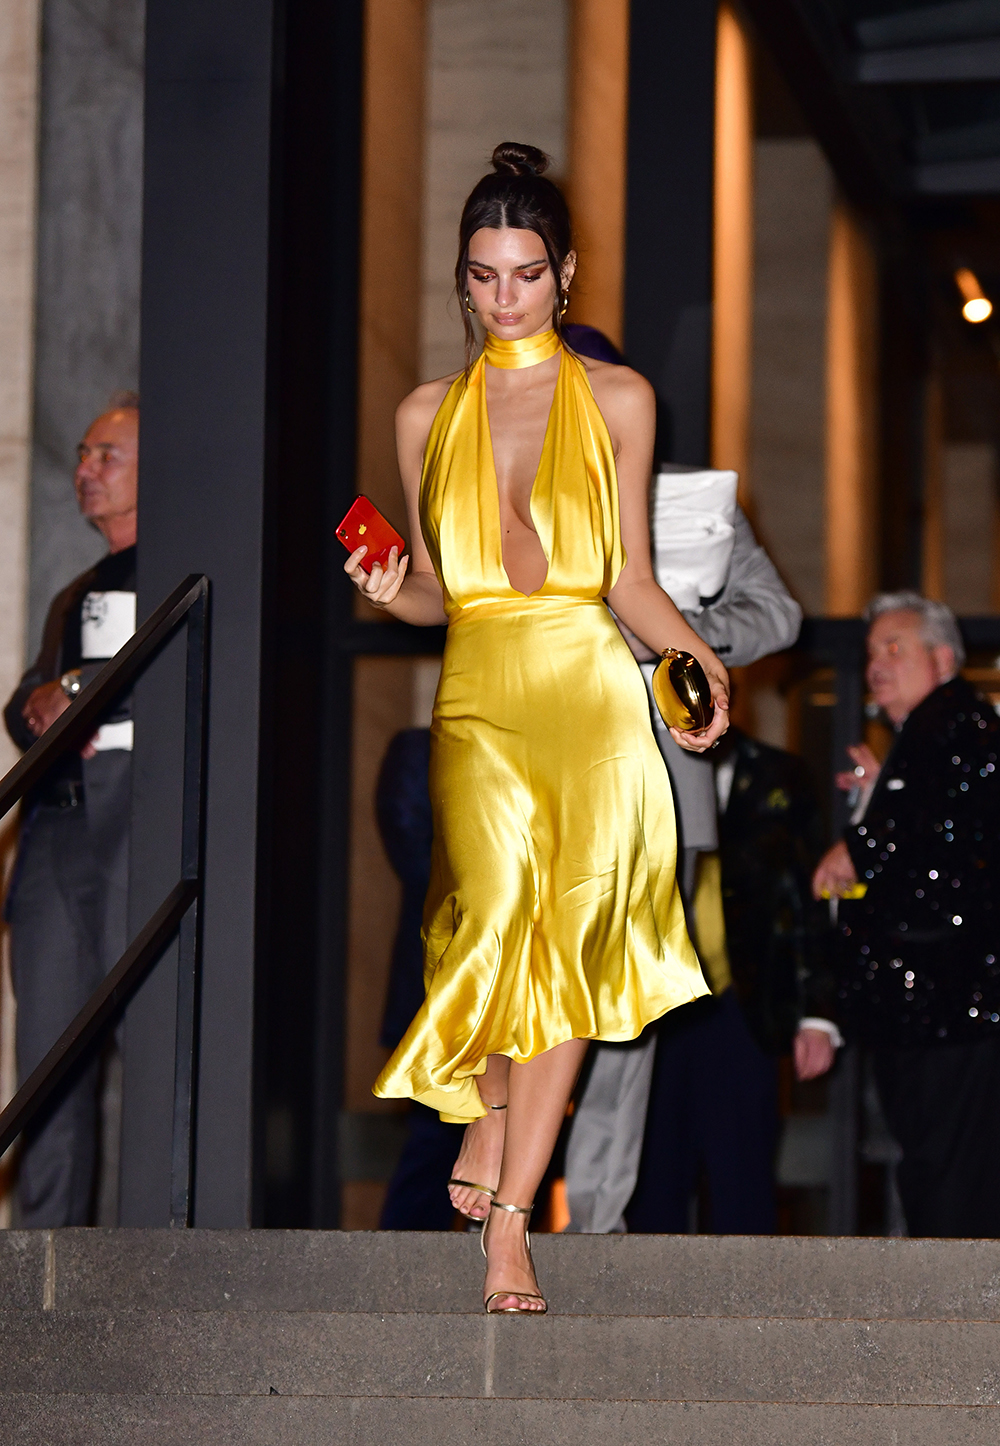 Emily Ratajkowski was one of a few guests who didn't wear Marc Jacobs, opting for a gold Saks Potts gown instead.